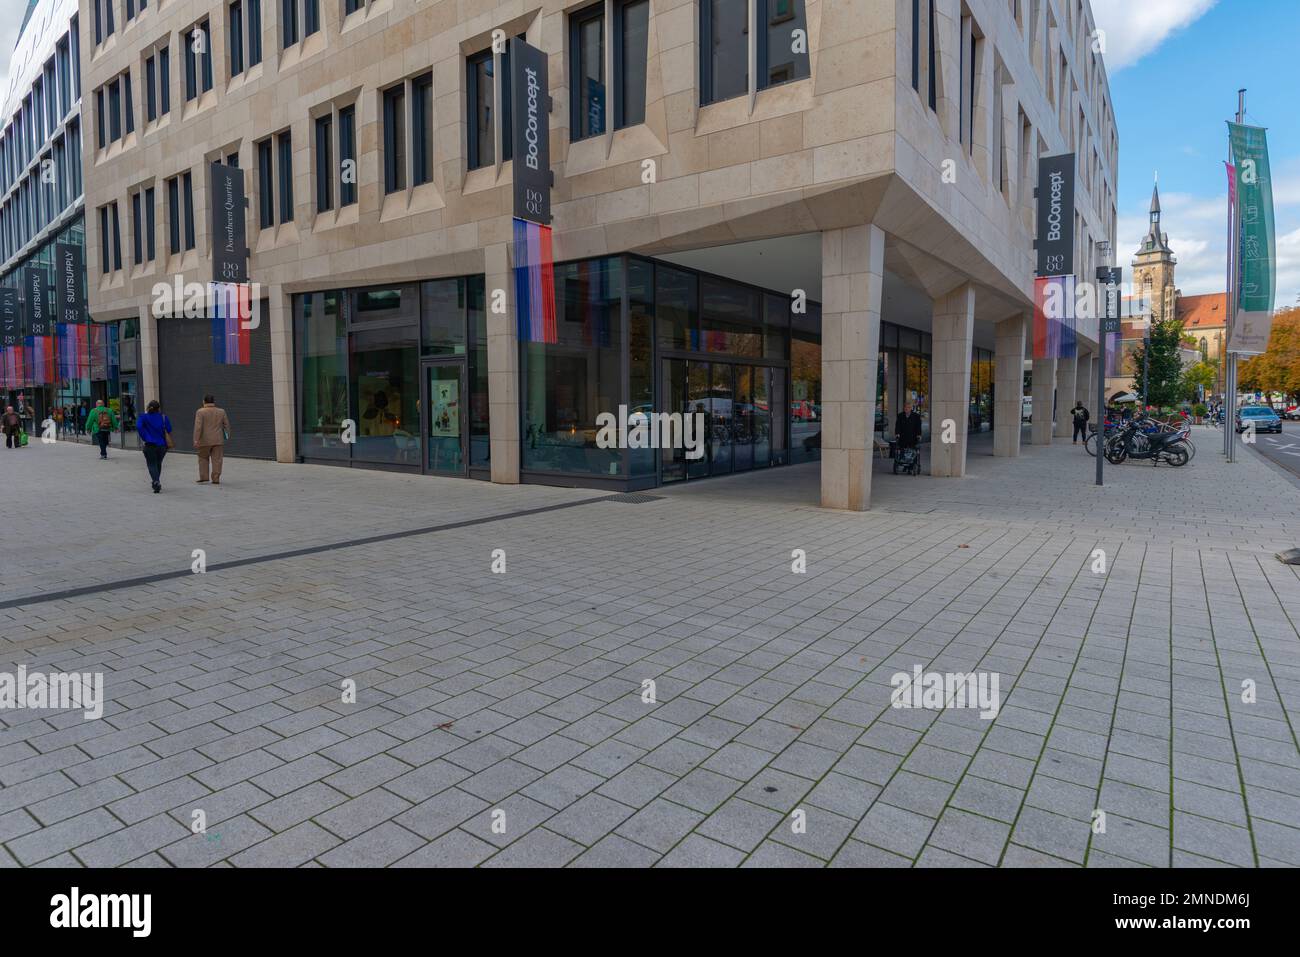 Exqisite shopping area Dorotheen Quartier, city centre, Stuttgart, Baden-Württemberg, Southern Germany, Central Europe Stock Photo